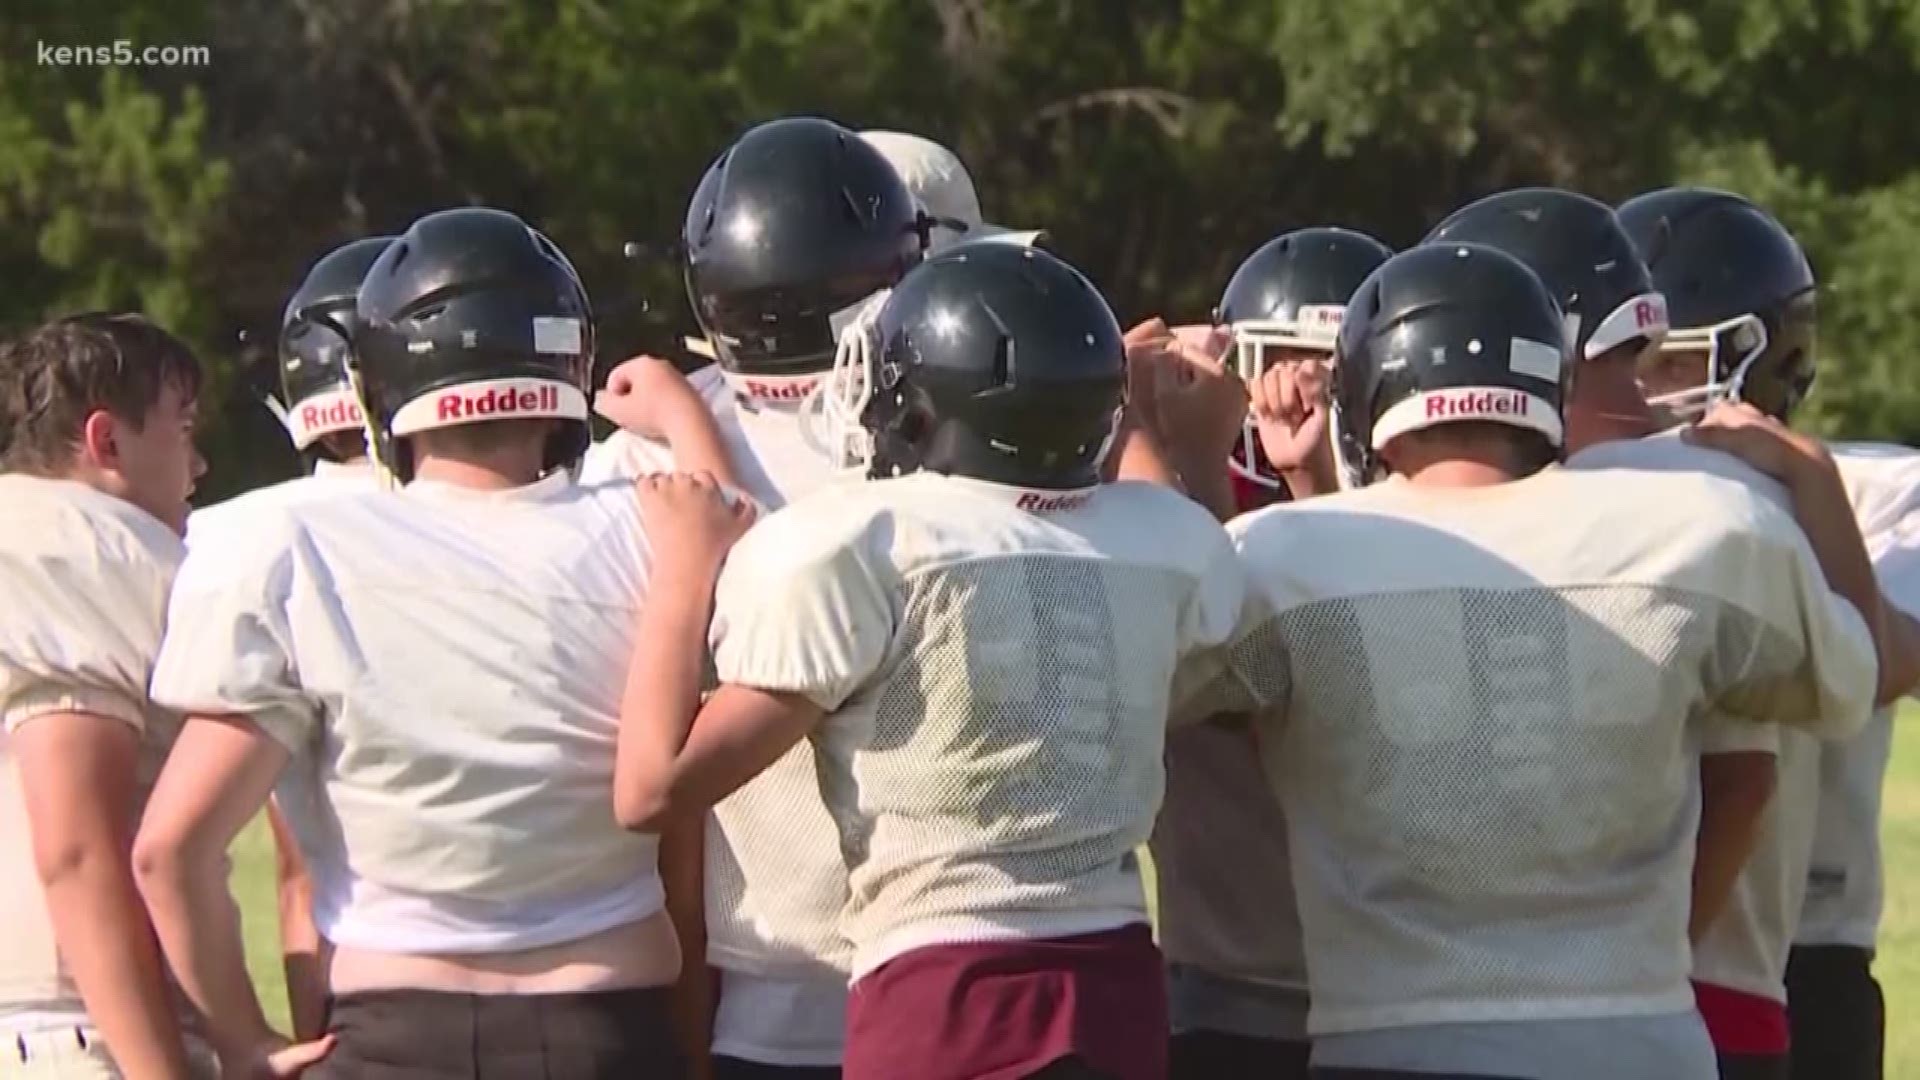 The Atonement Academy is a 6-man football team gaining momentum on its campus. Evan Closky has the story.